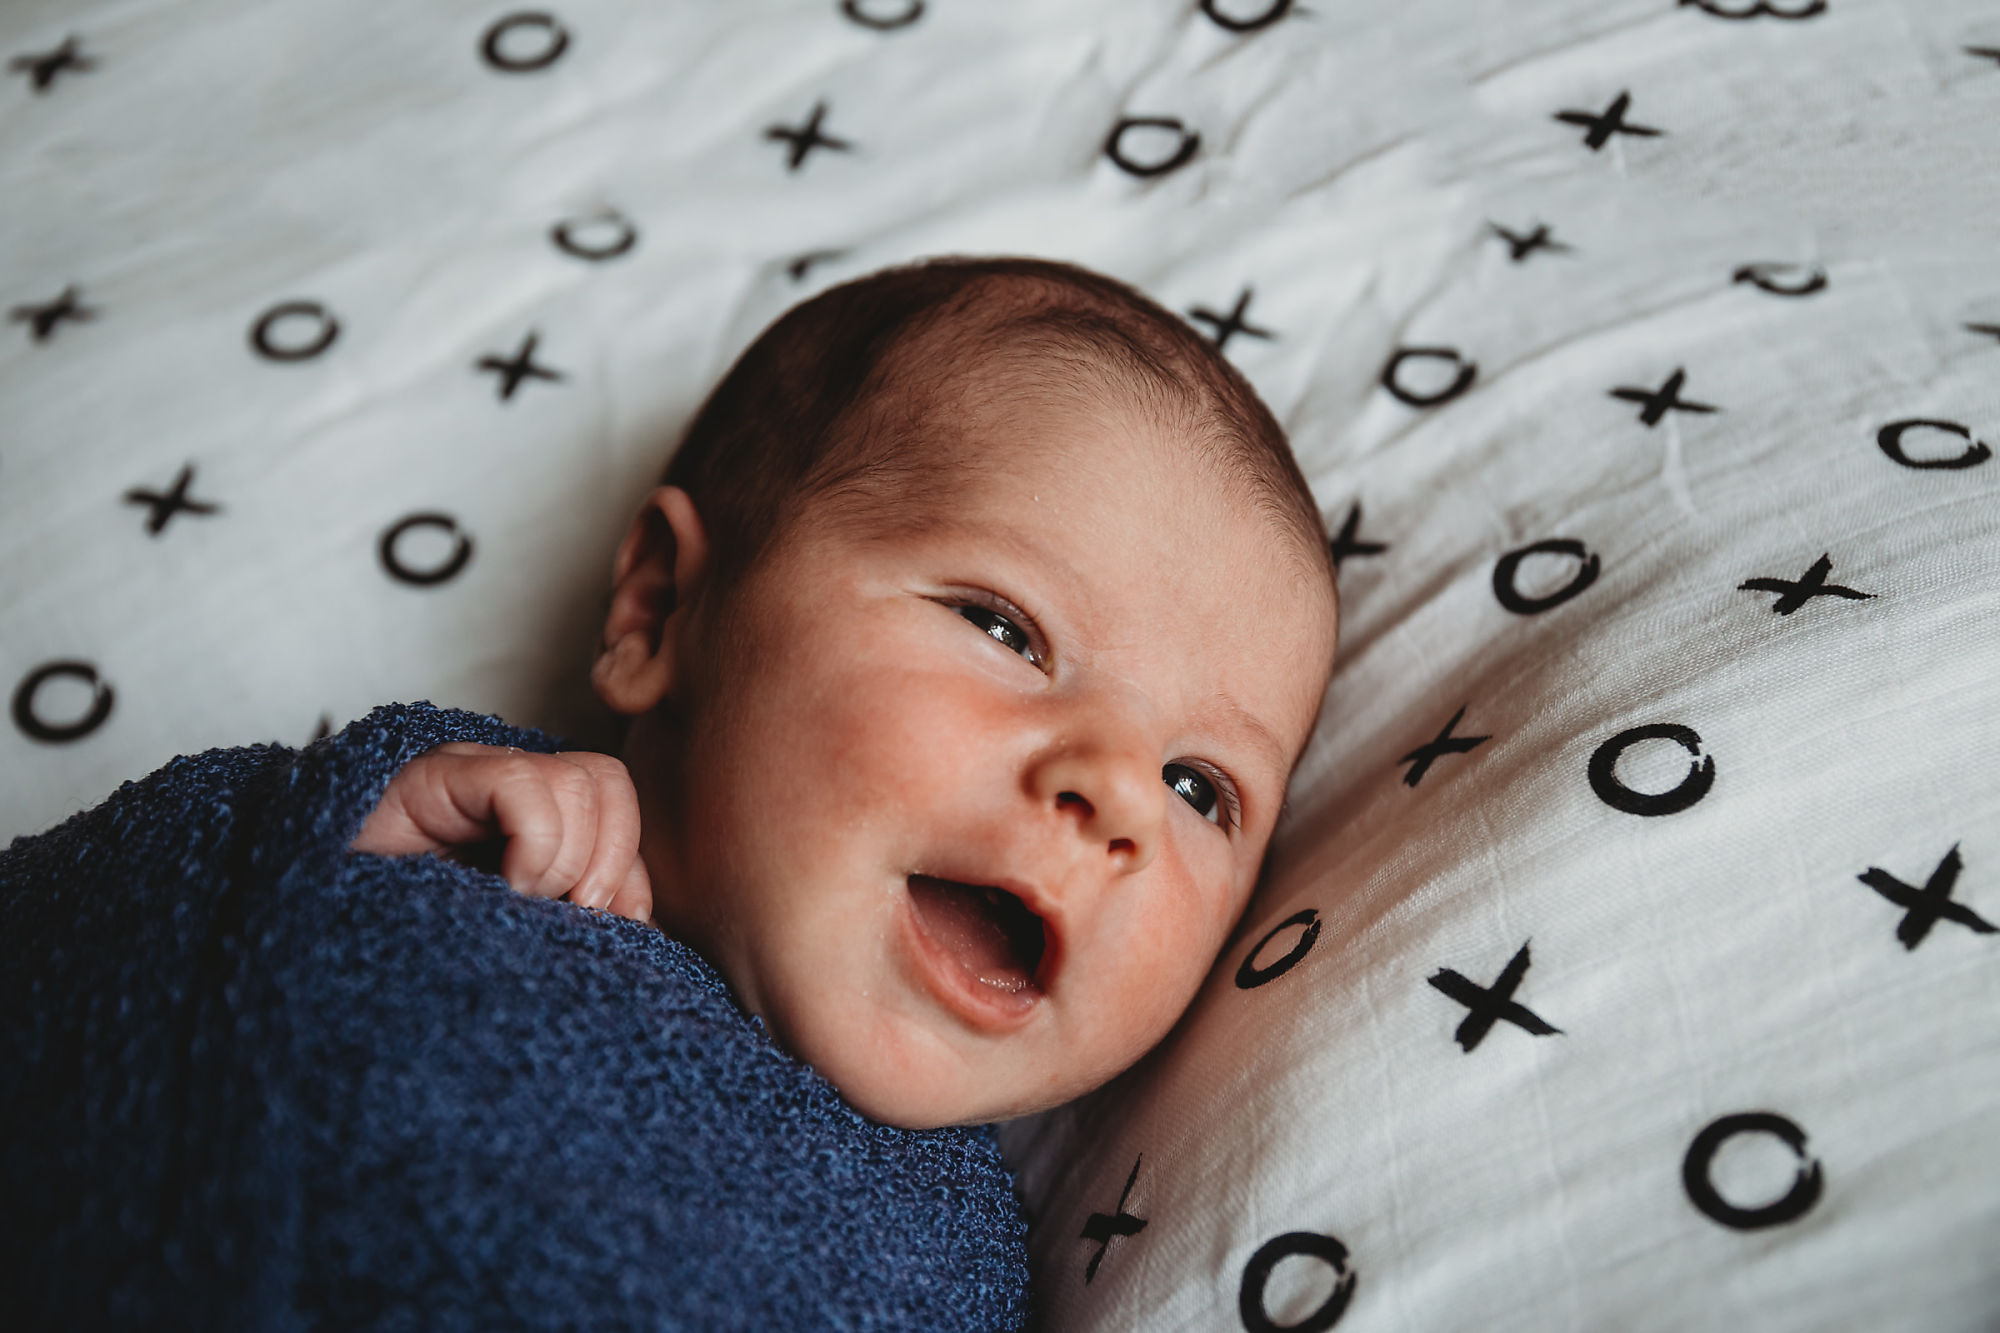 Dundas Newborn Photographer Jennifer Blaak captures a gentle smile from baby during their newborn and family lifestyle photography session at home in Hamilton.